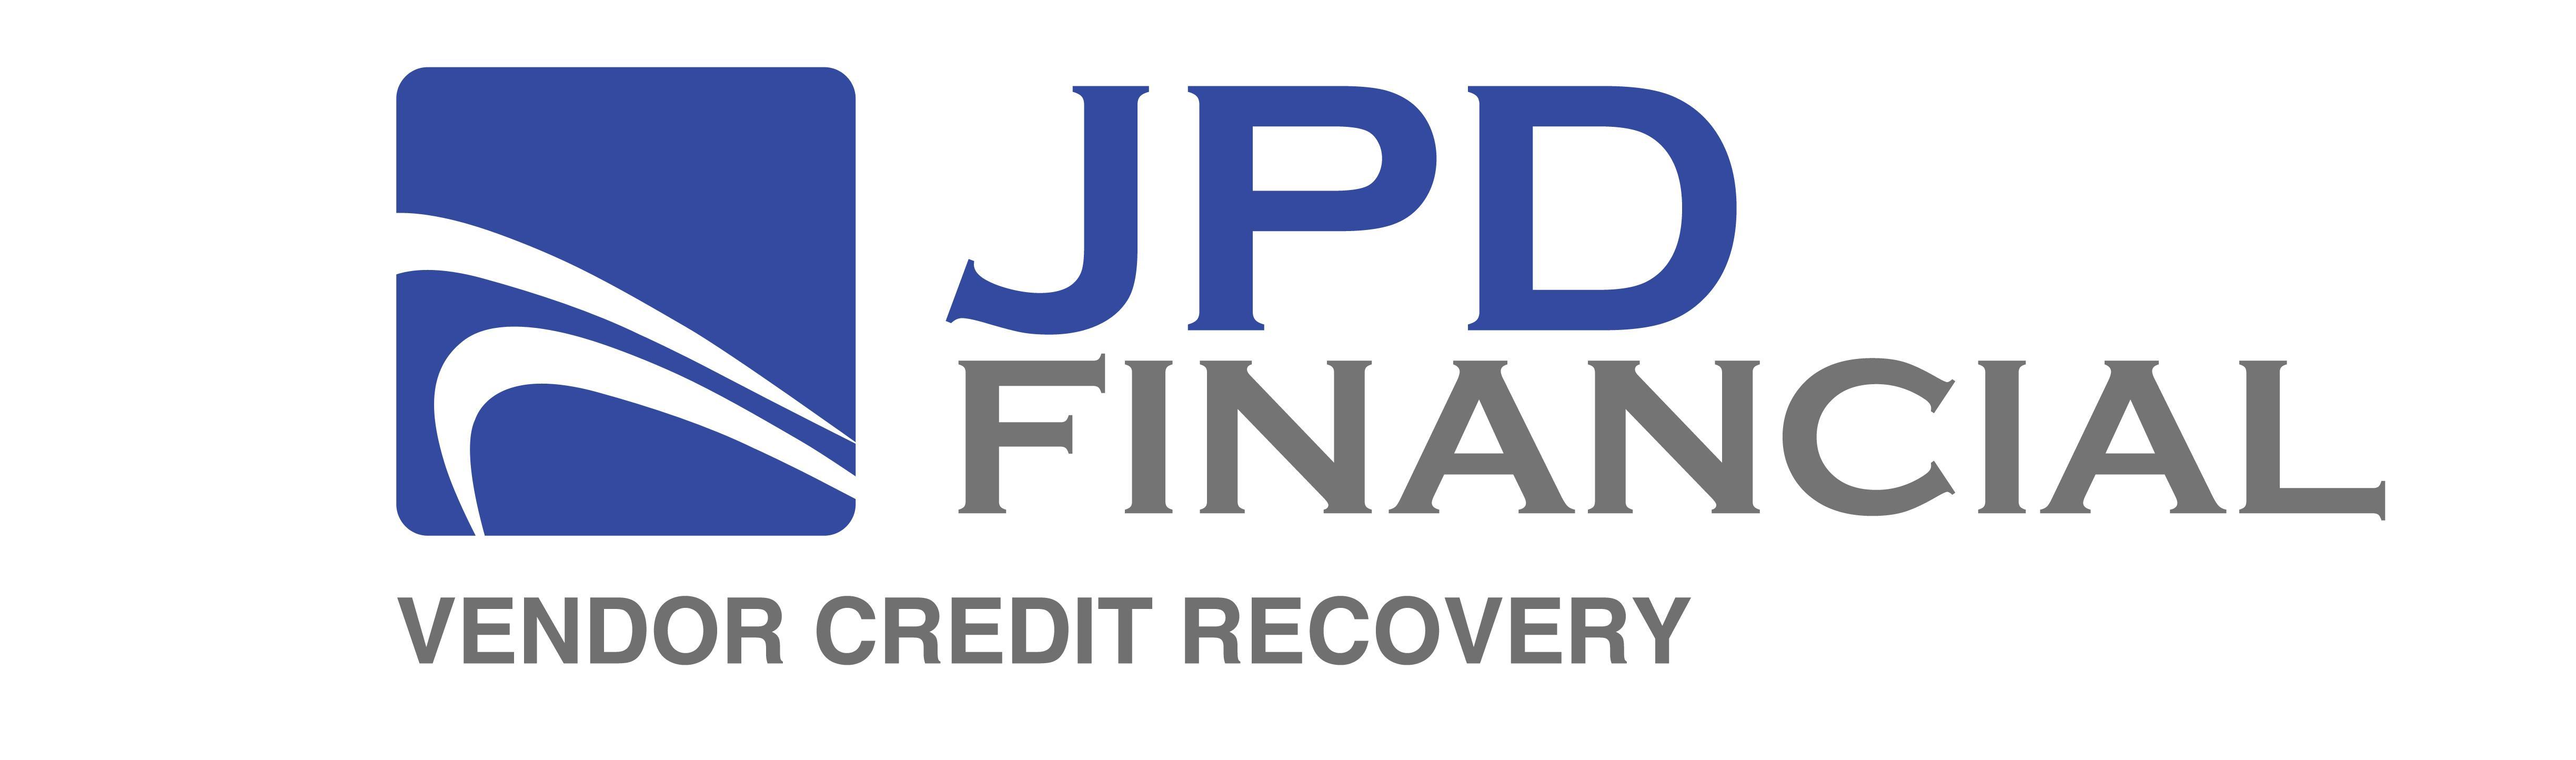 JPD Financial Vendor Credit Recovery Services Company Logo